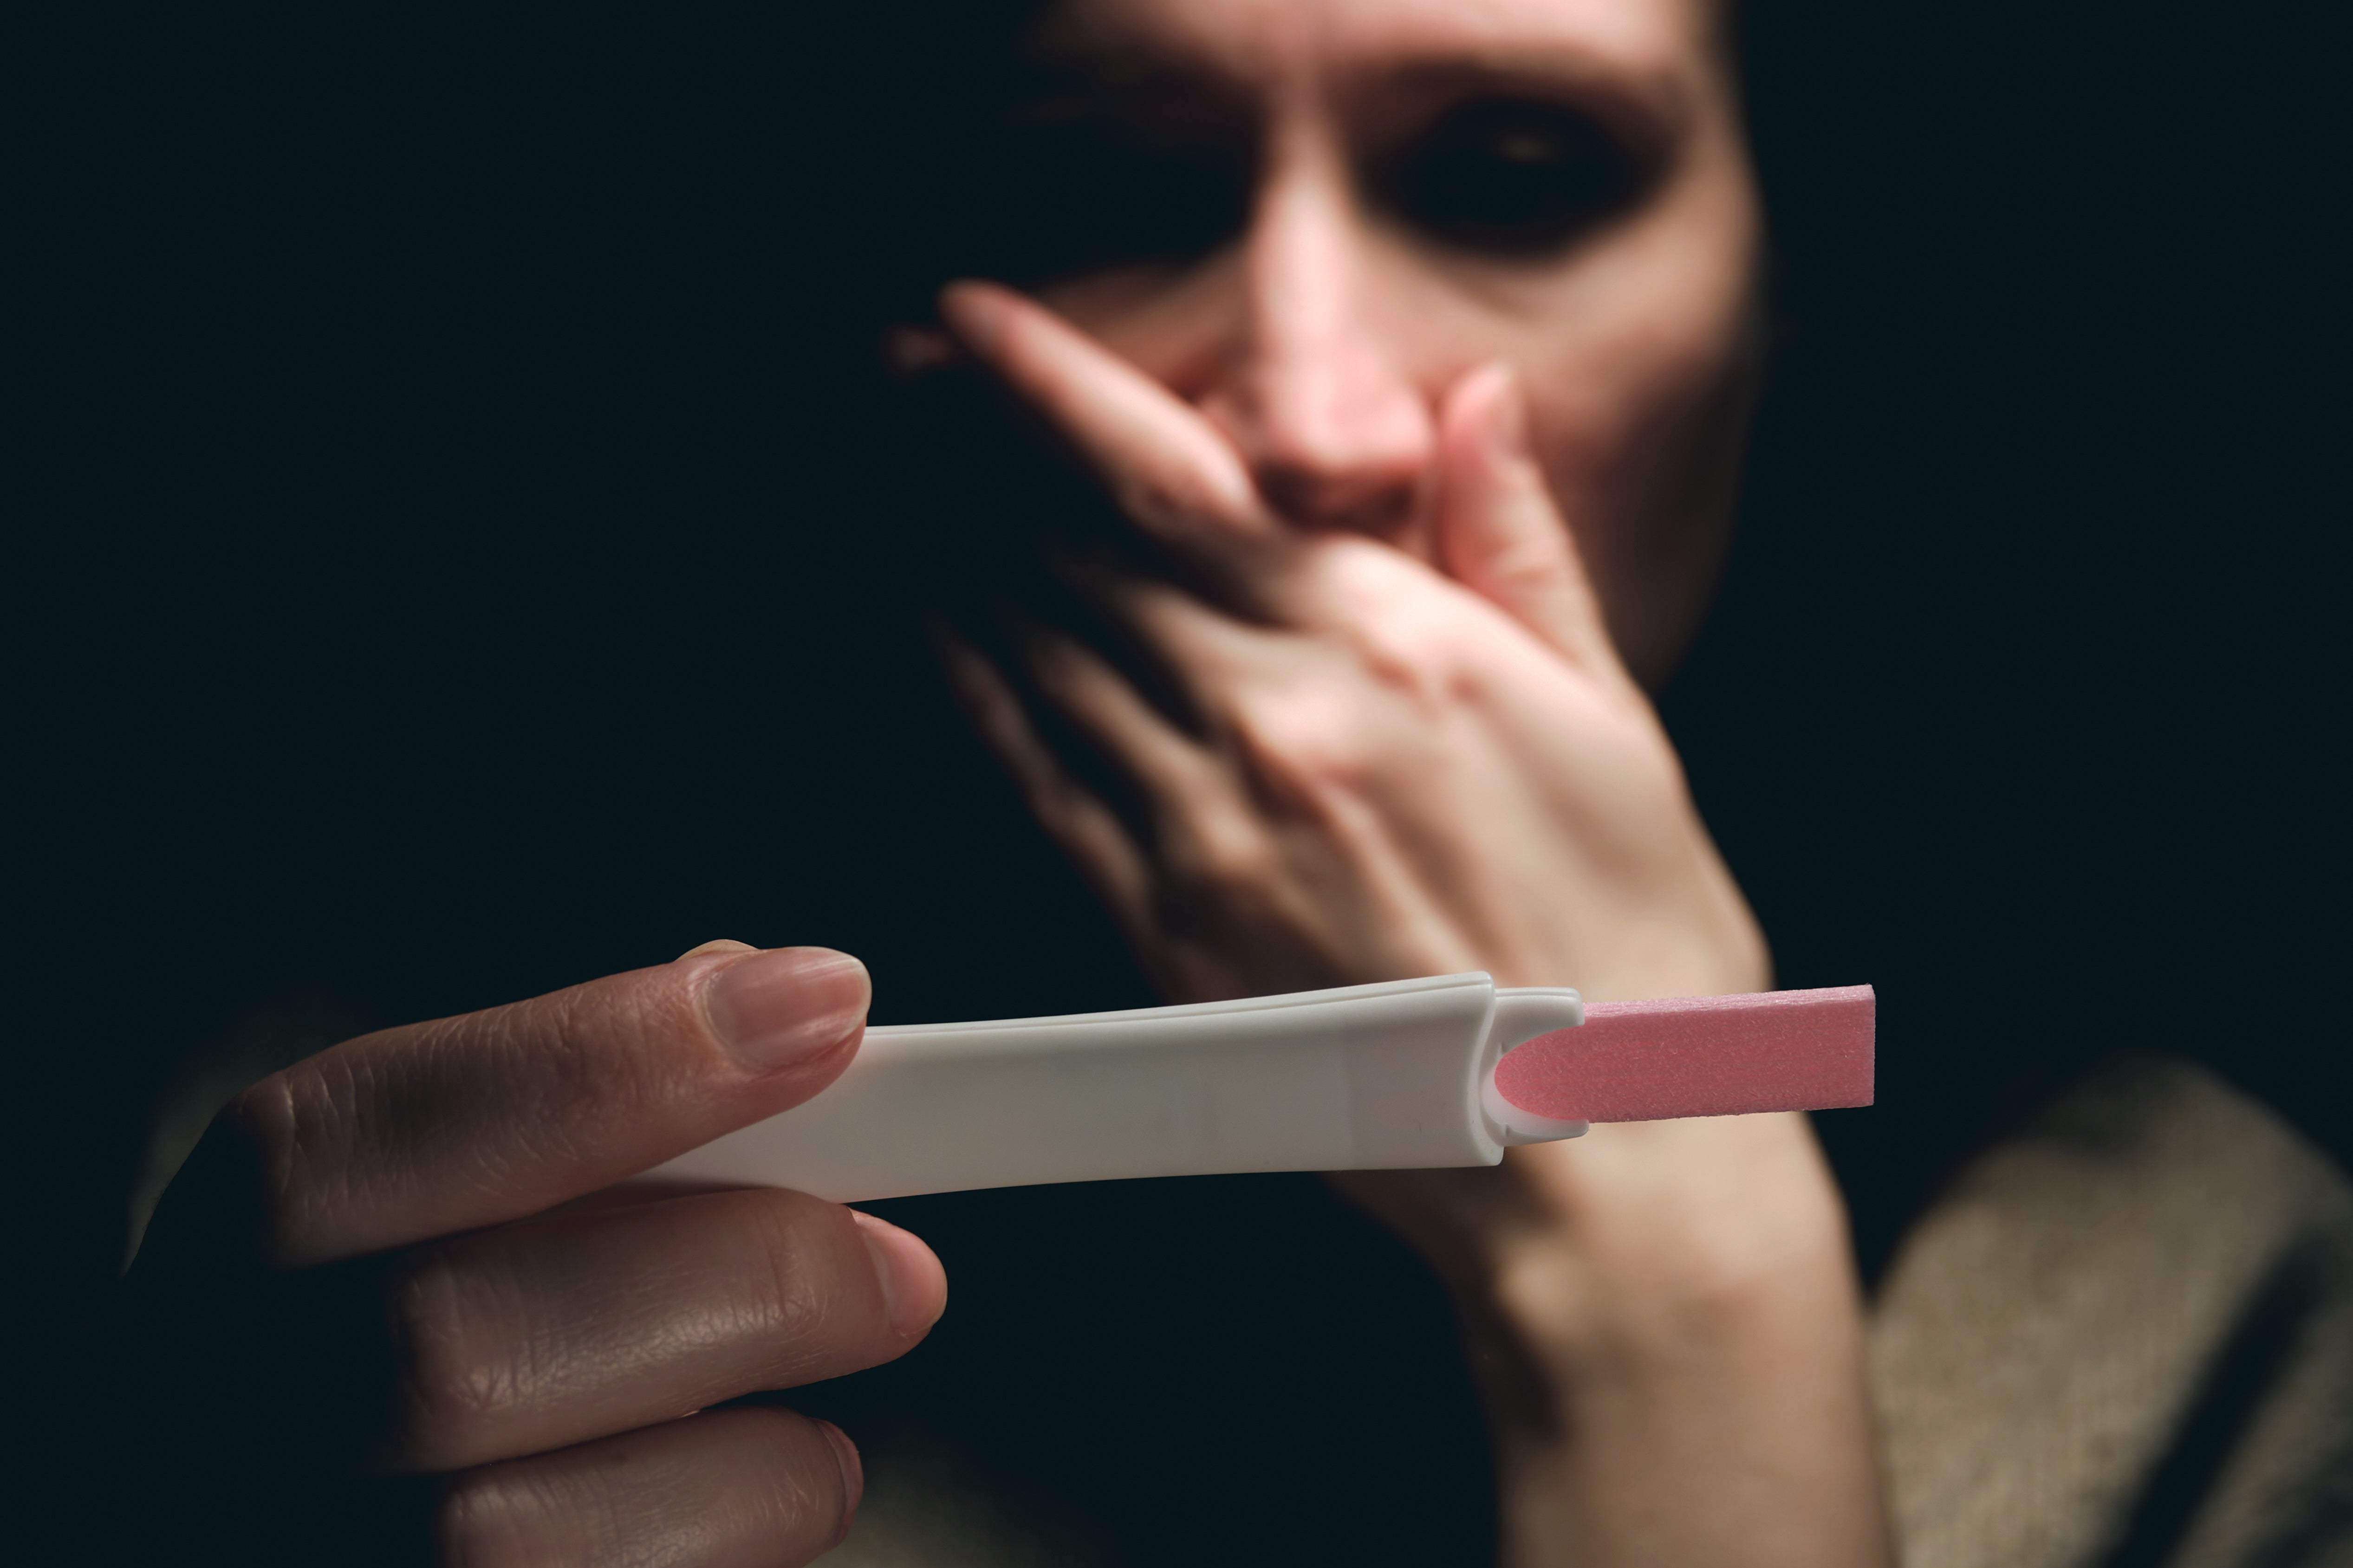 A woman seems to have a negative reaction after viewing a pregnancy test